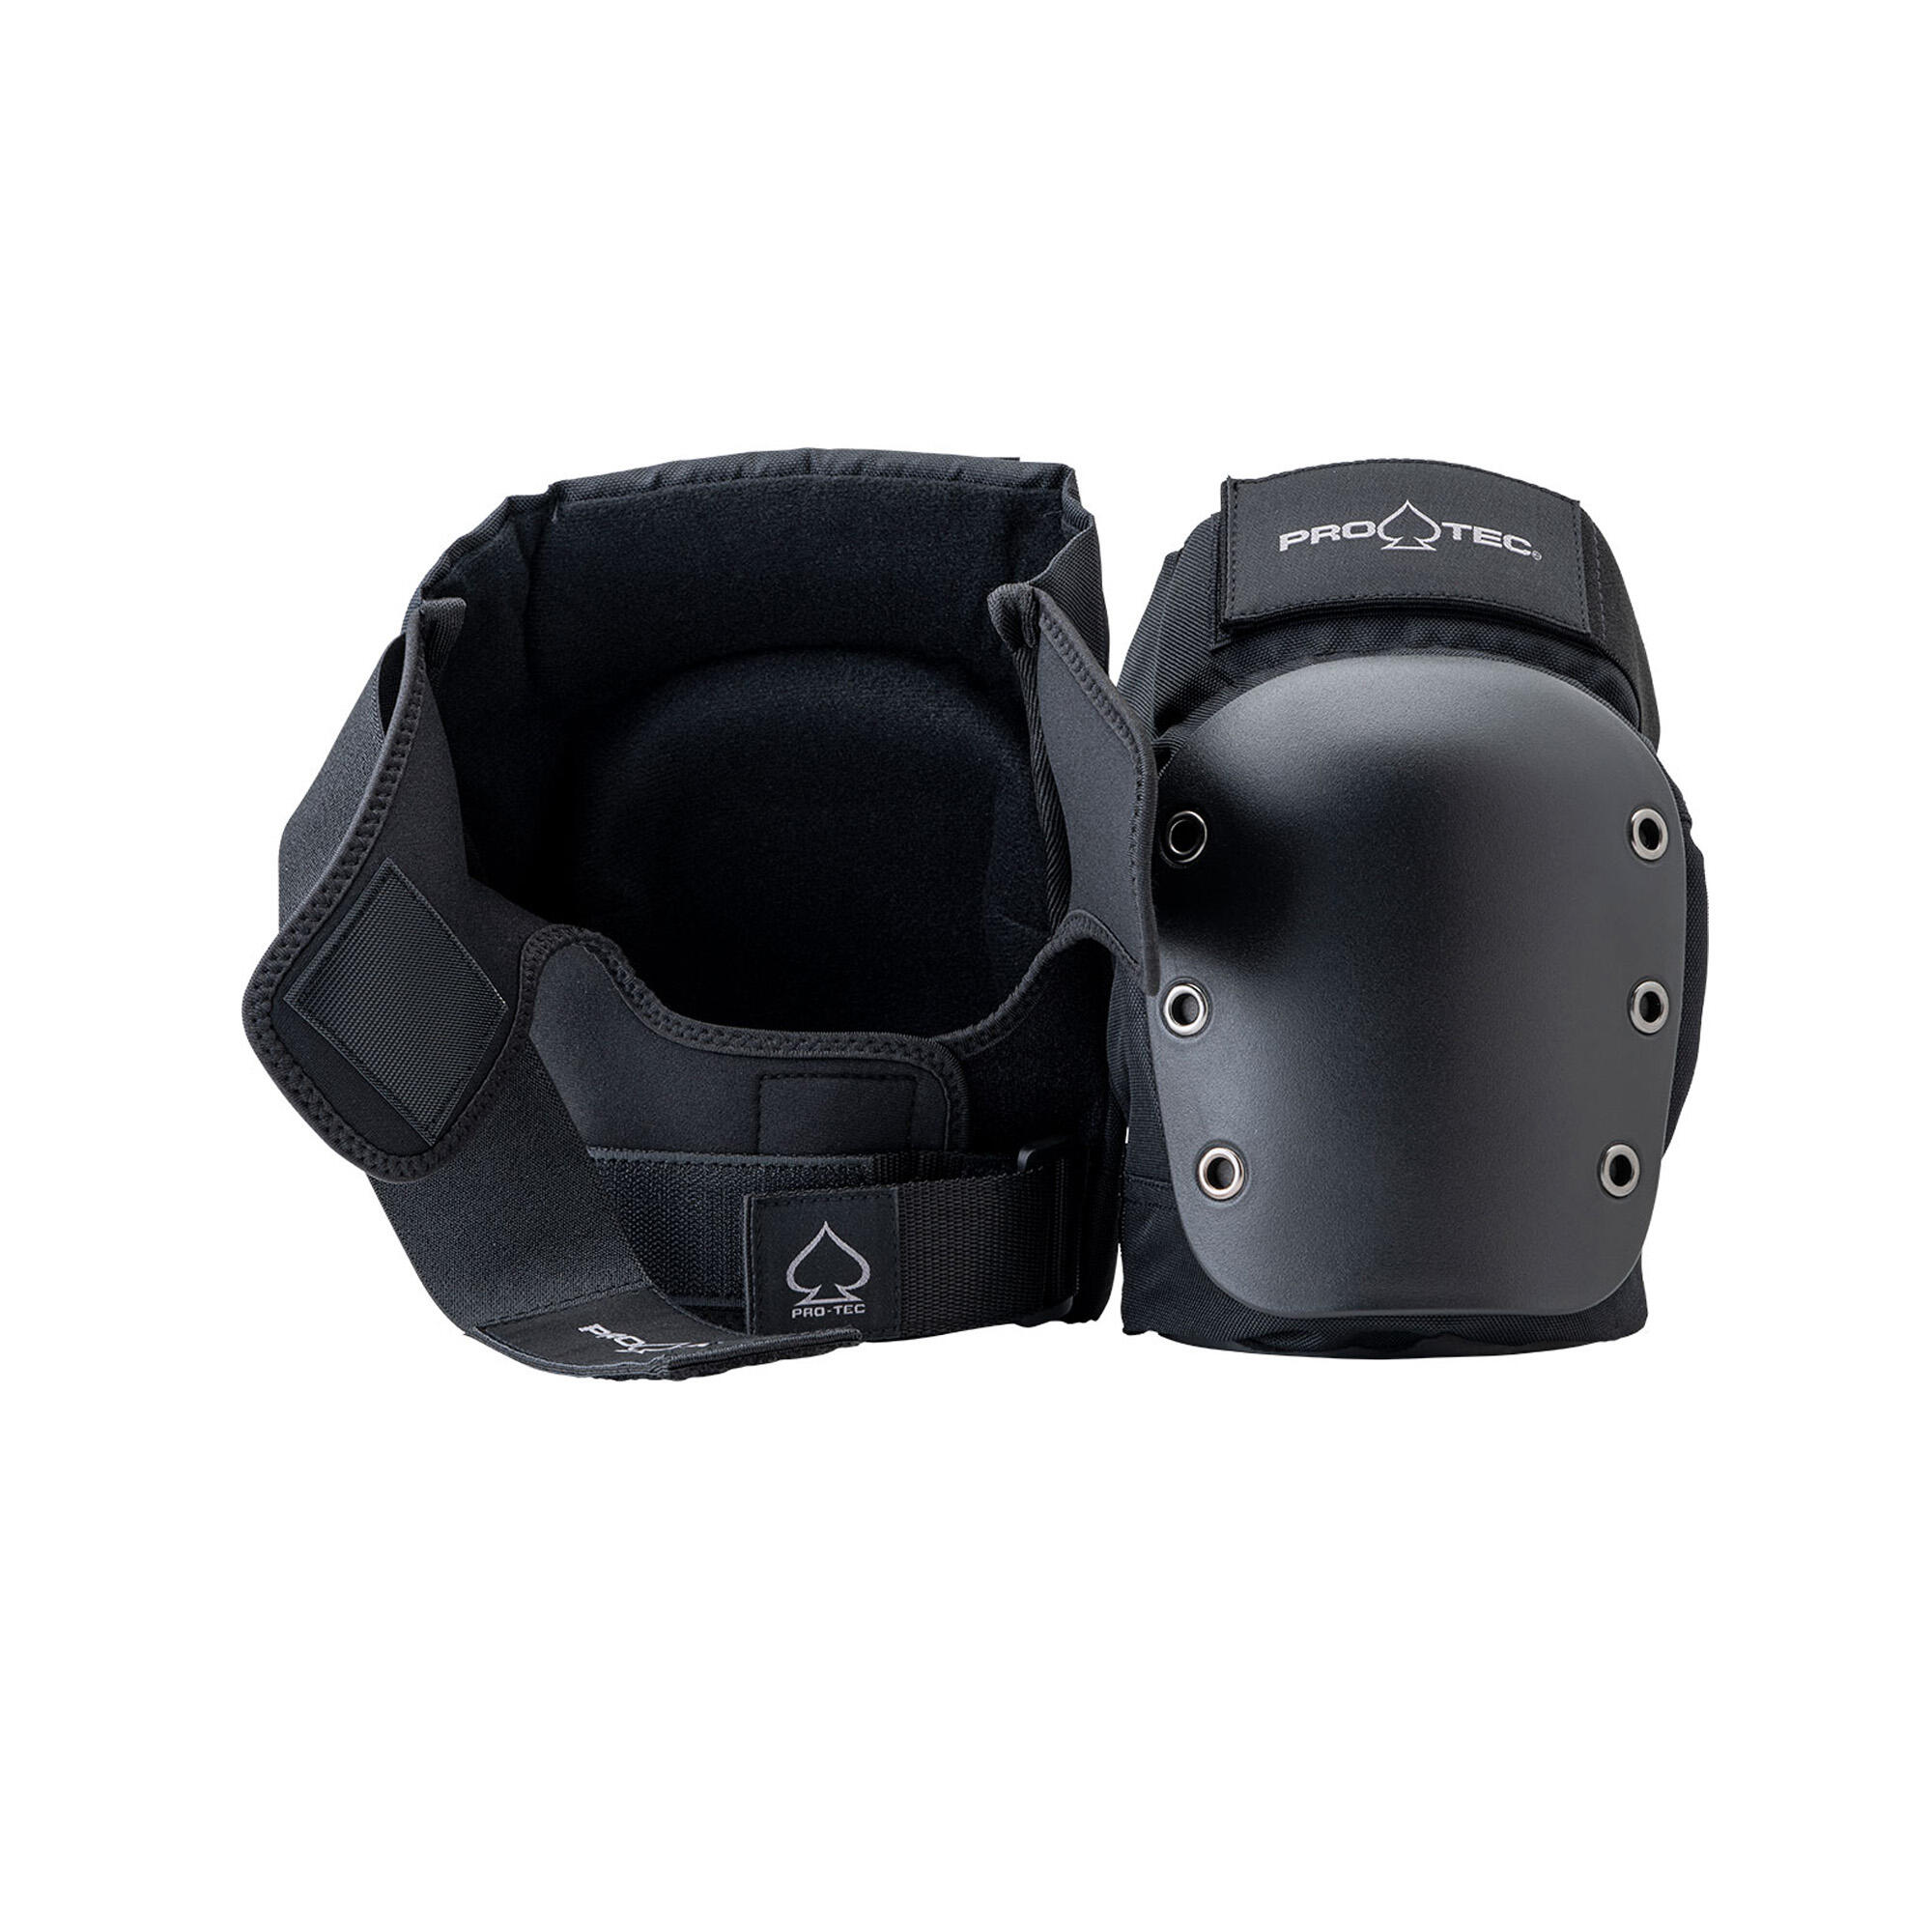 Adult Skateboarding Knee and Elbow Pads - Black 5/5